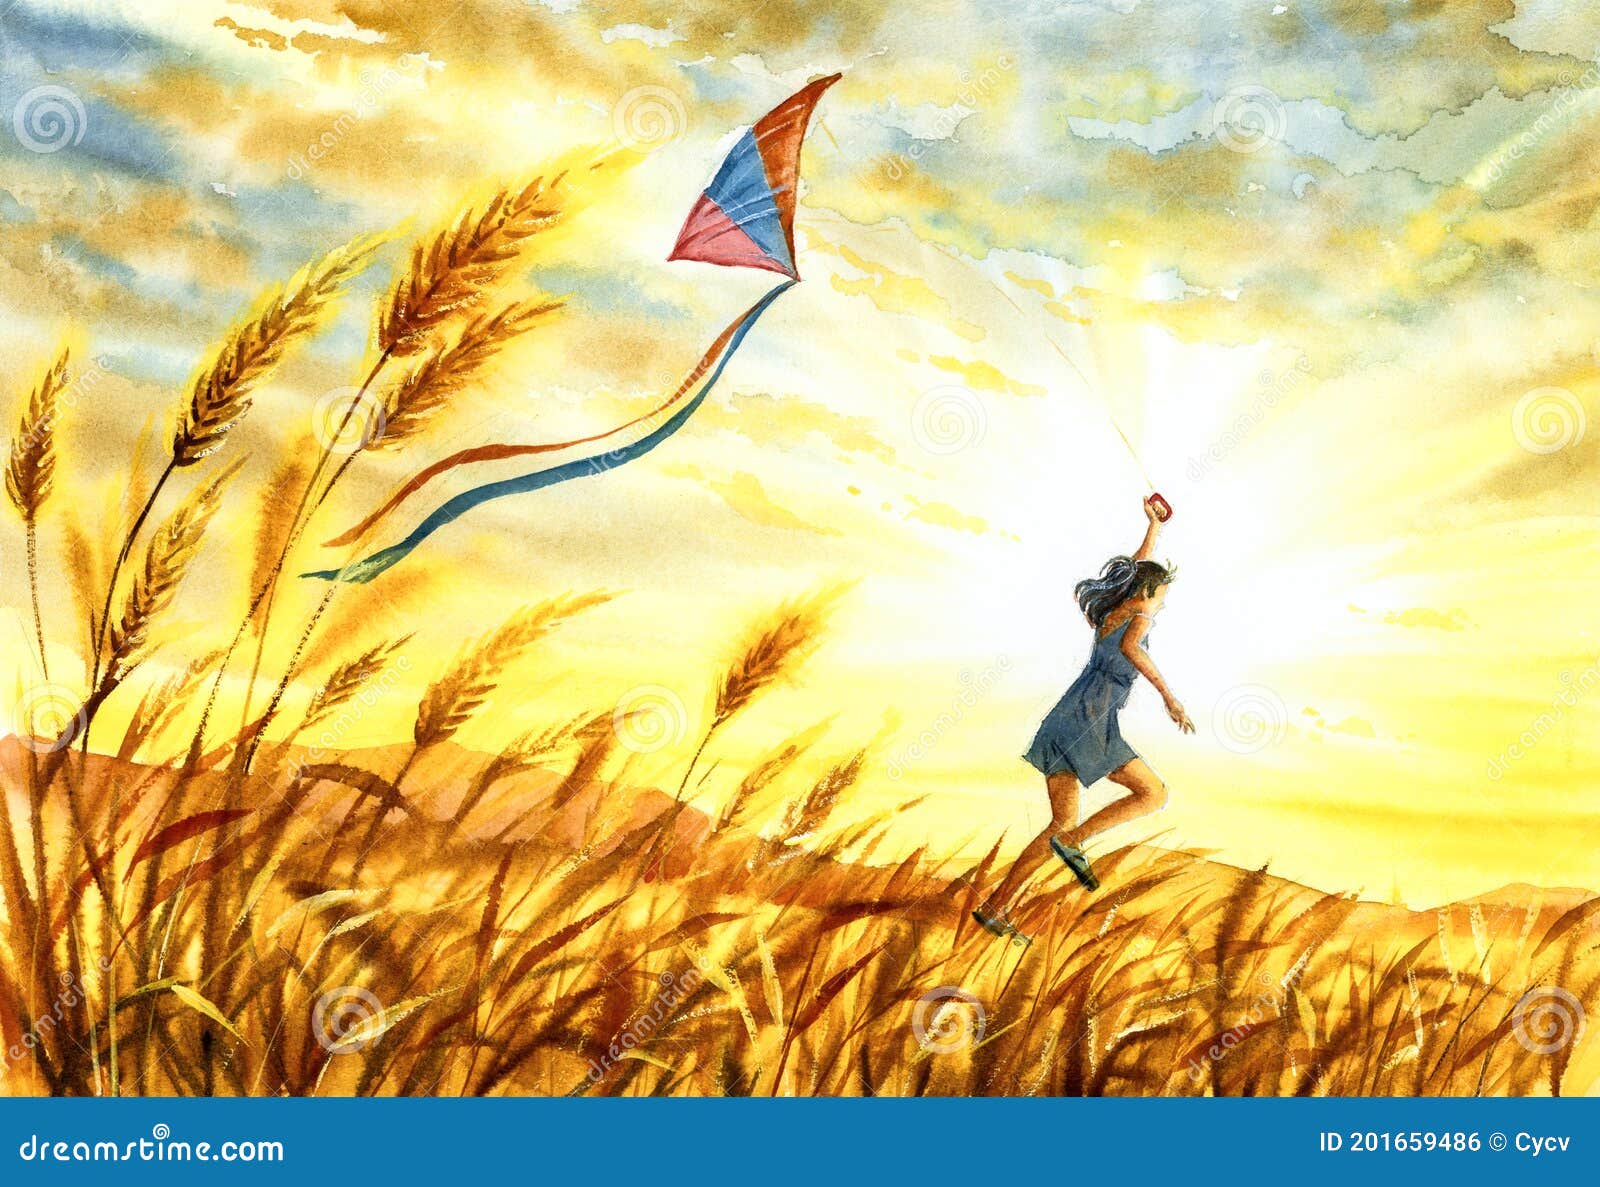 1000 Kite Flying Drawing Stock Photos Pictures  RoyaltyFree Images   iStock